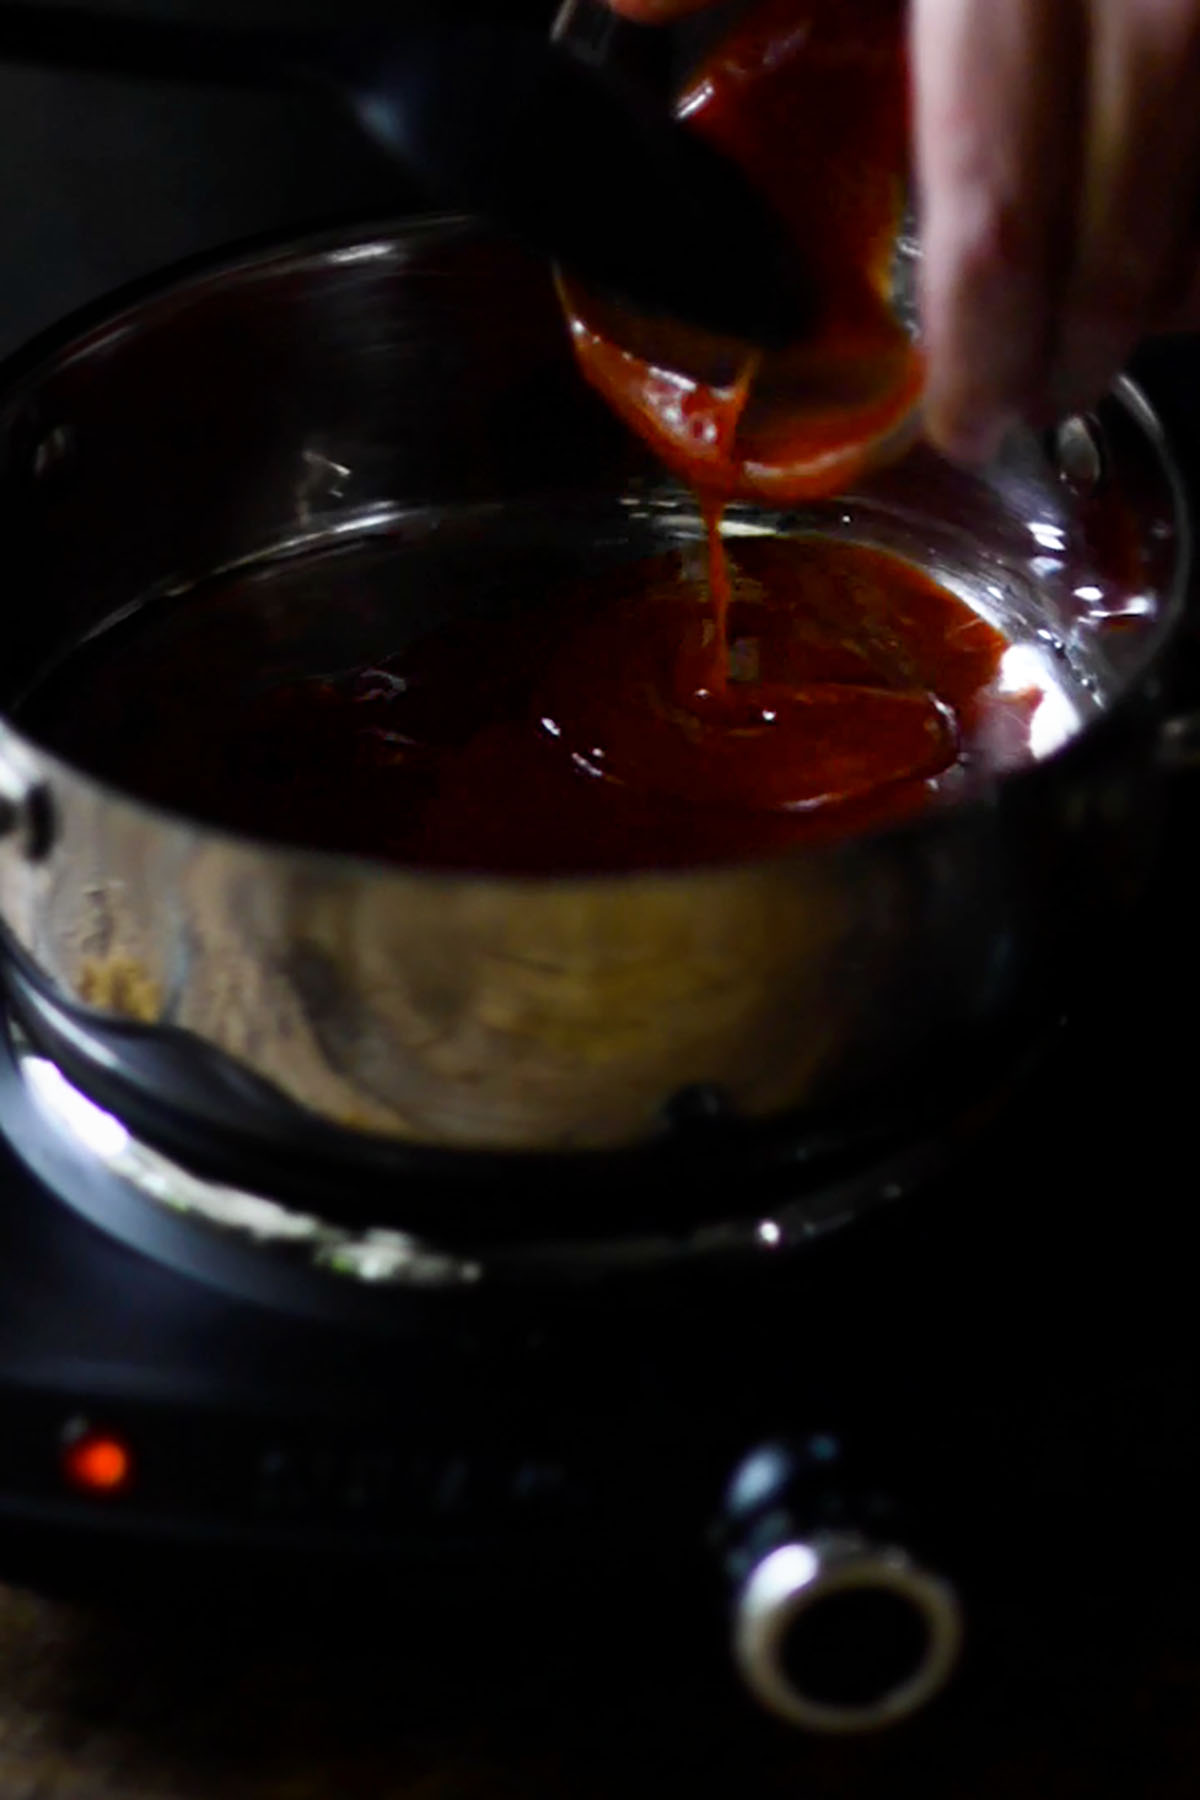 Ketchup being added to a small sauce pan over a heating element.